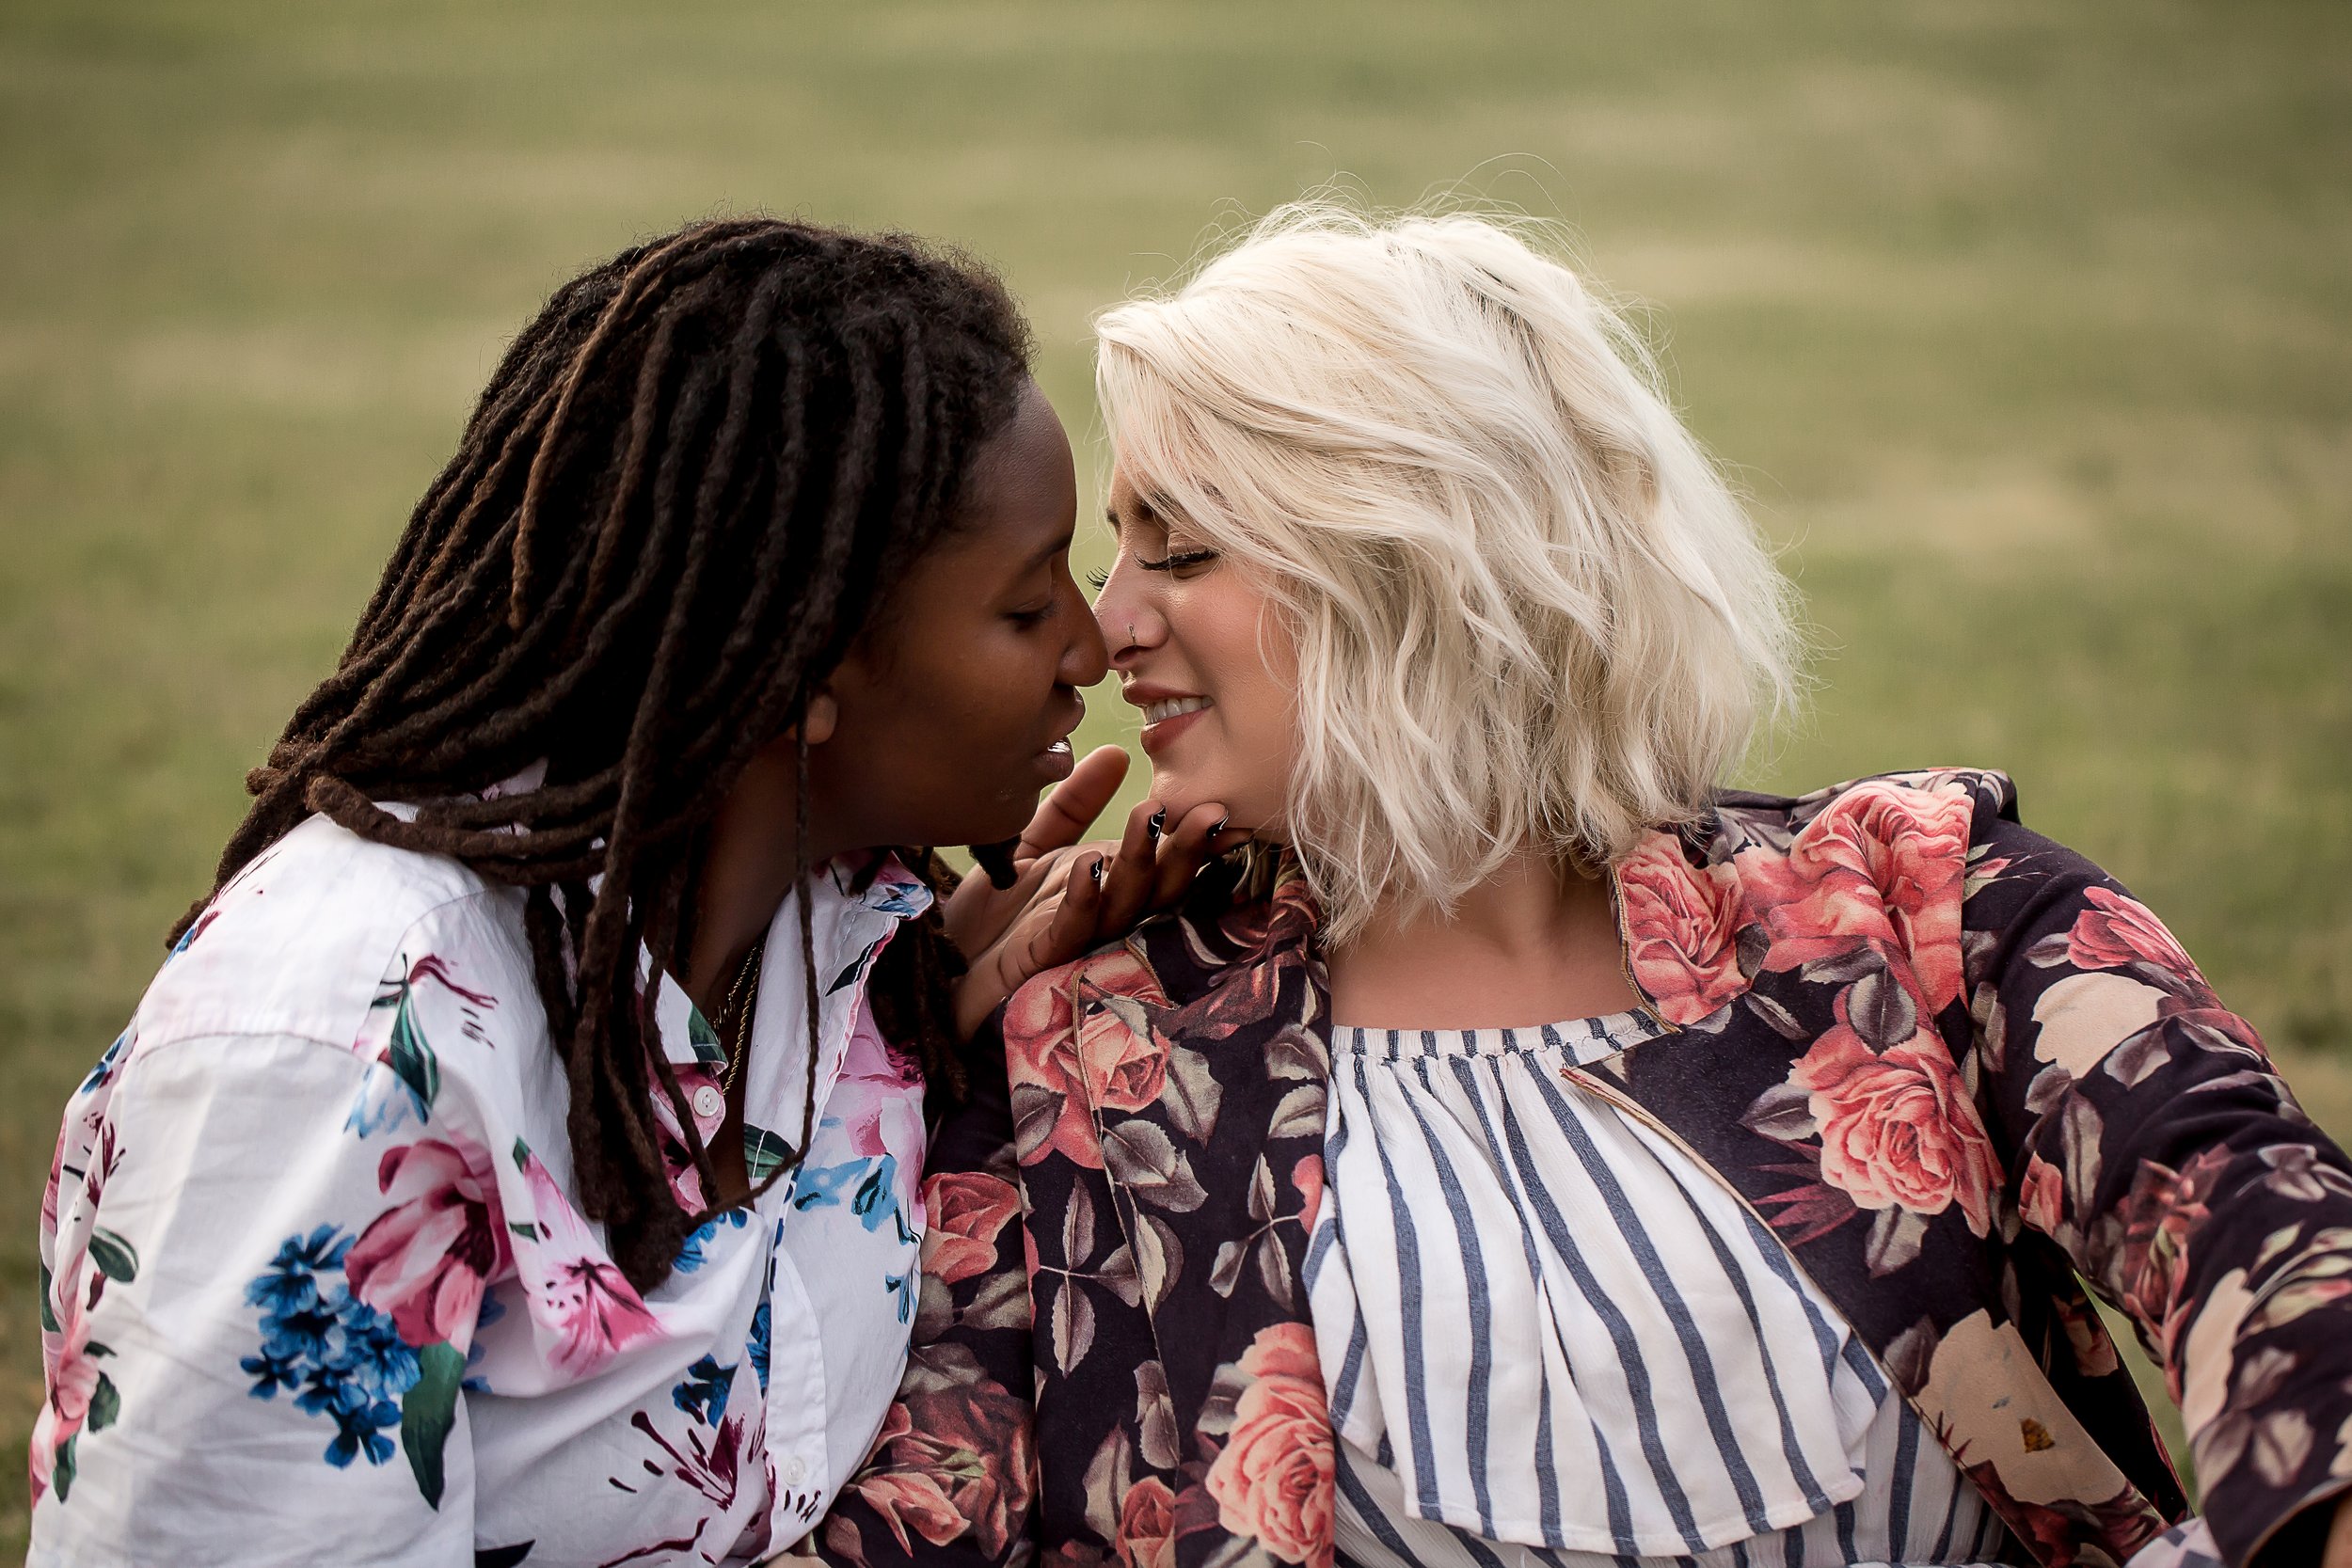 charlotte north carolina wedding and portrait photographer engagement session what to wear LGBT midtown park couples session champagne photos engaged lesbian lgbtq friendly photographers